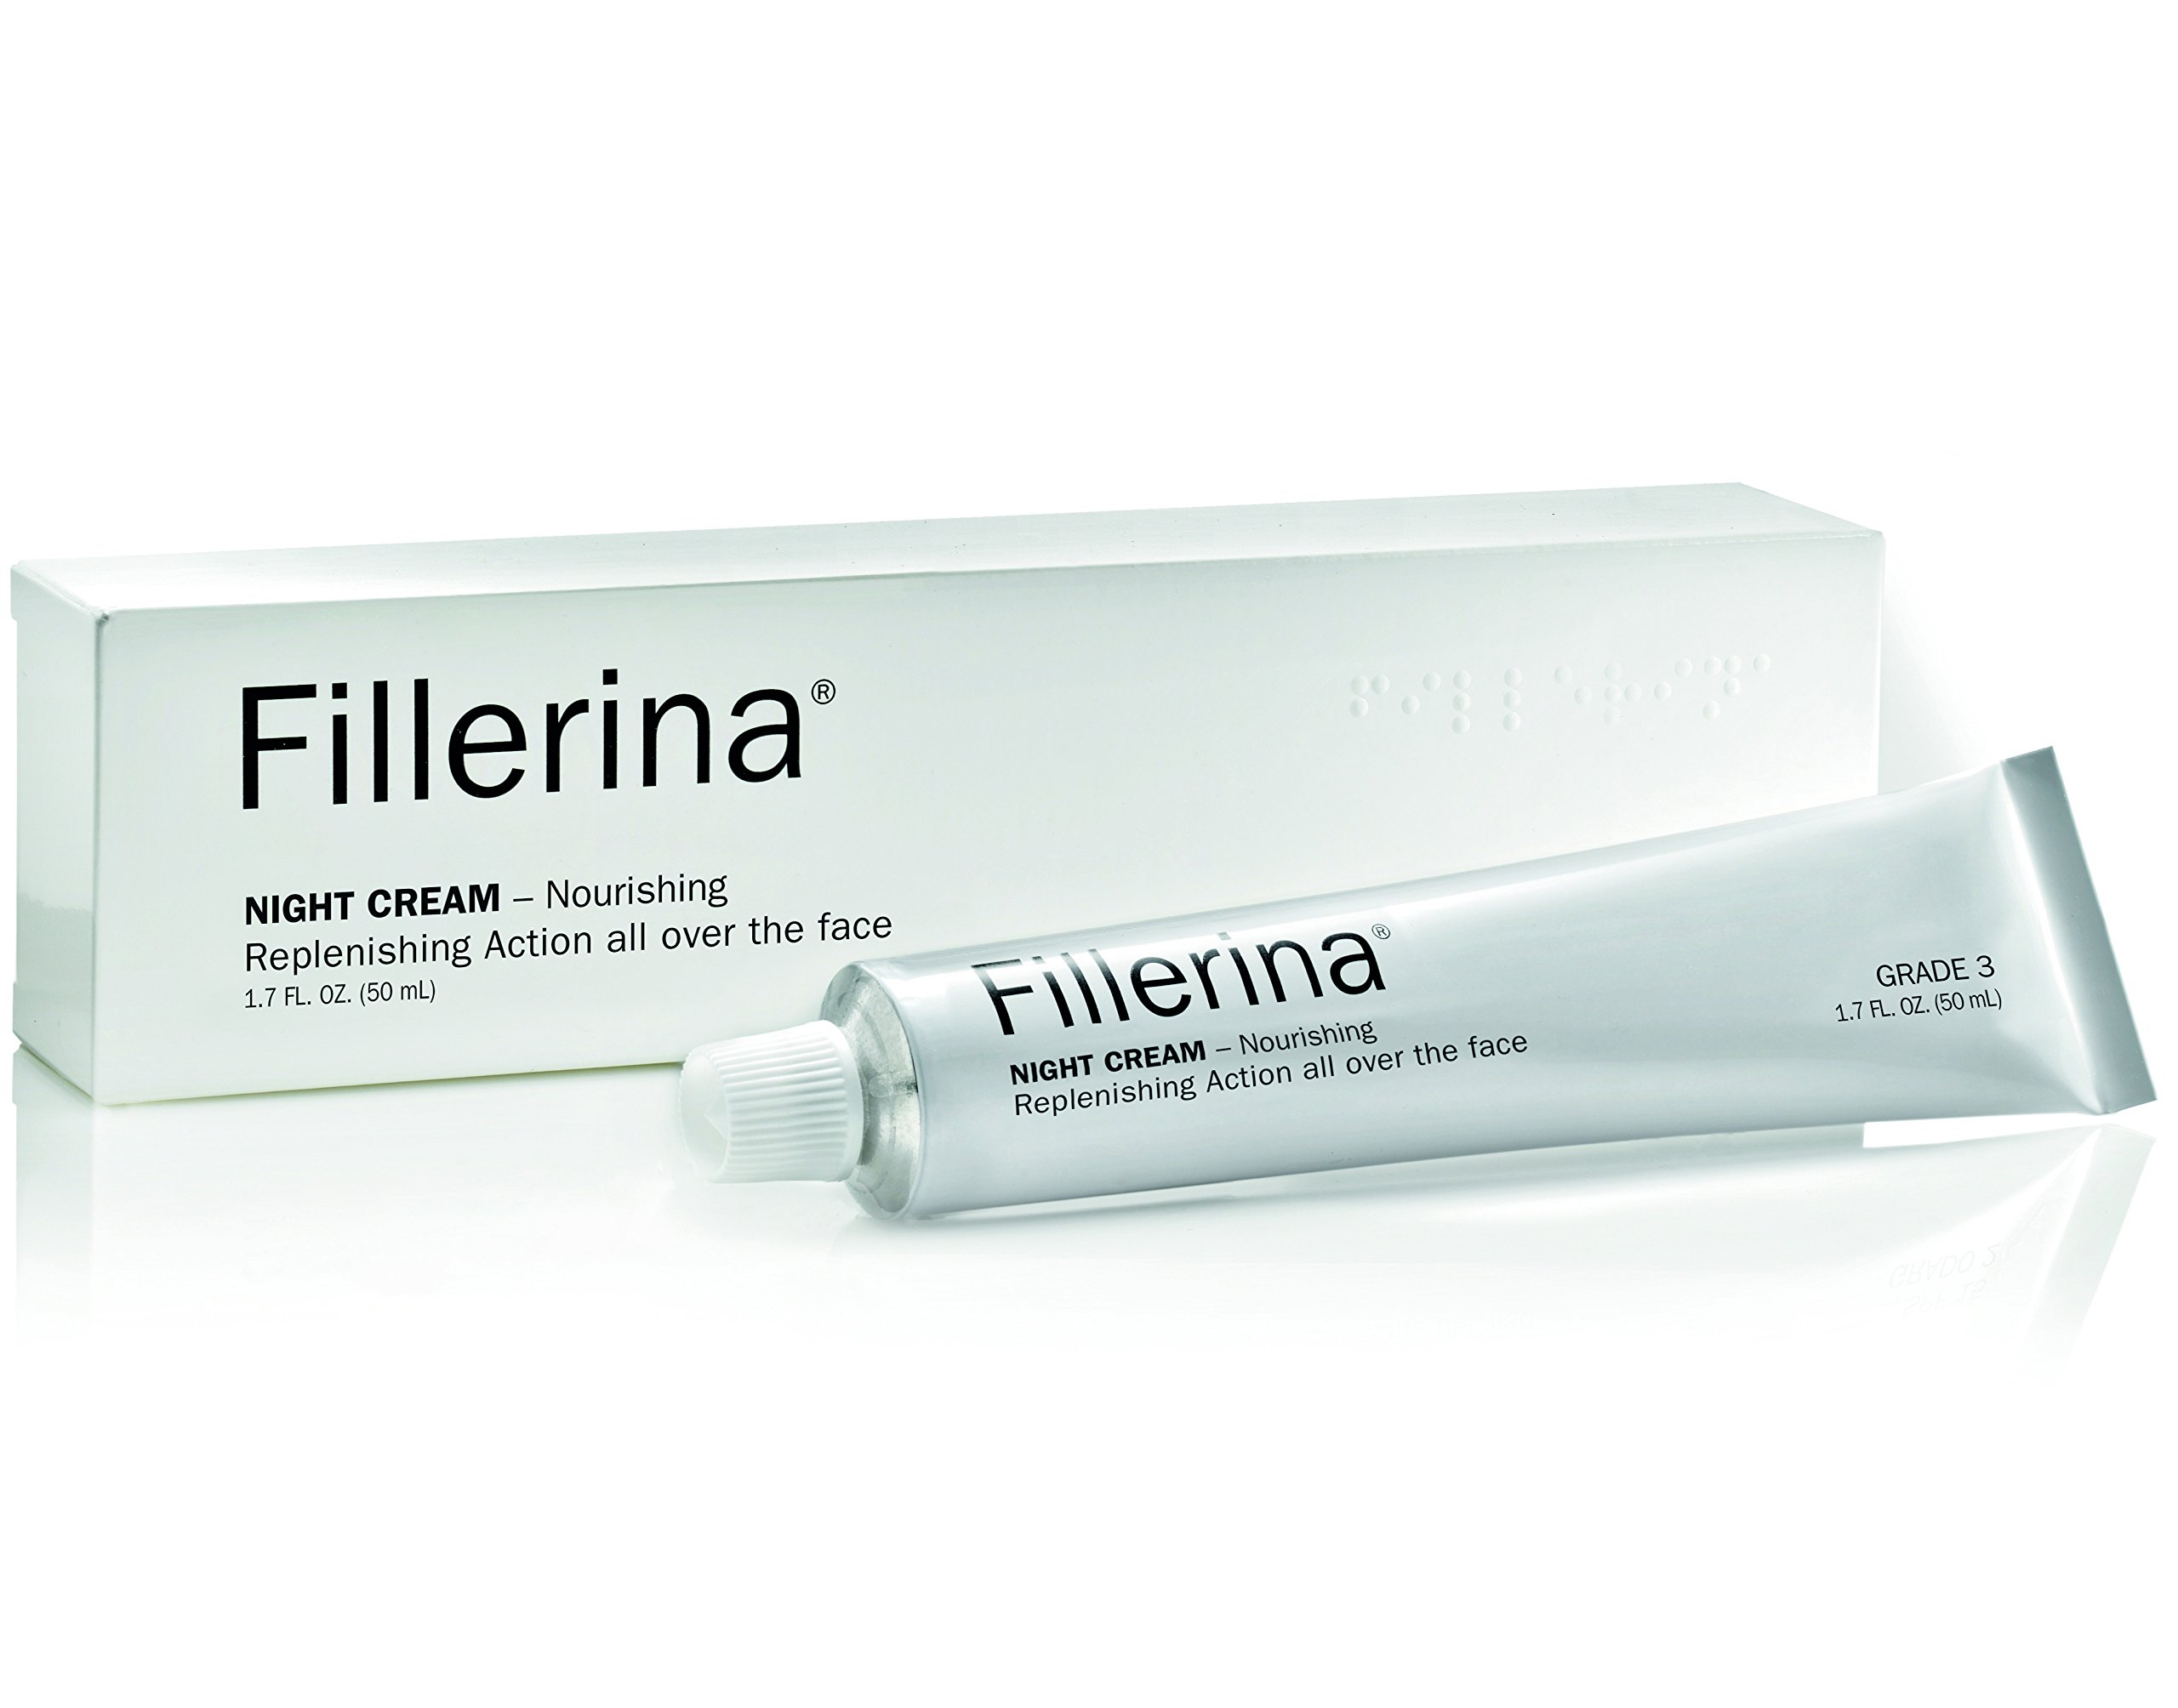 Fillerina Night Cream-Anti Aging Night Cream With Hyaluronic Acid and Shea Butter - Grade 3 is For Moderate wrinkles and beginning sagging.